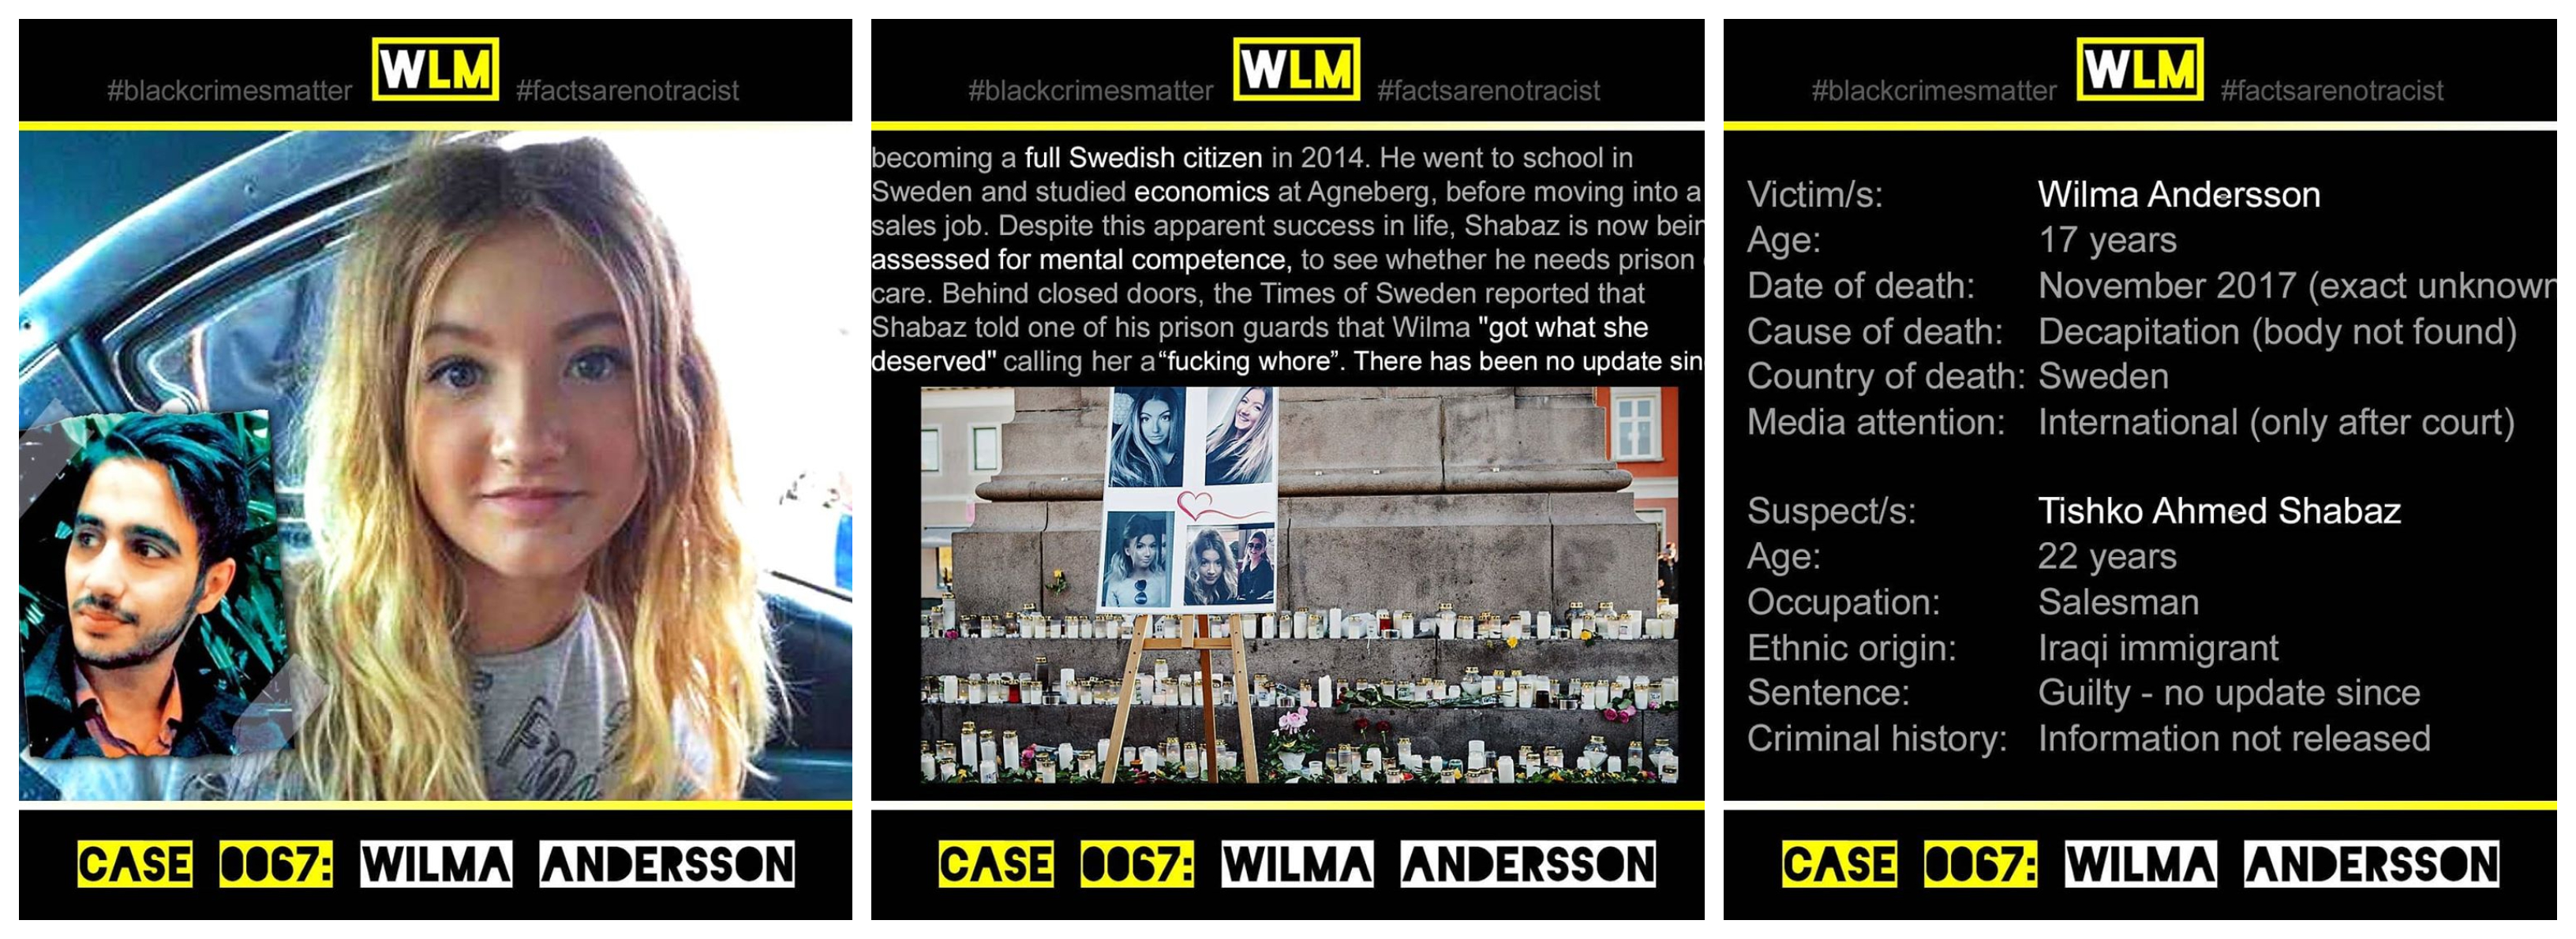 case-067-wilma-andersson